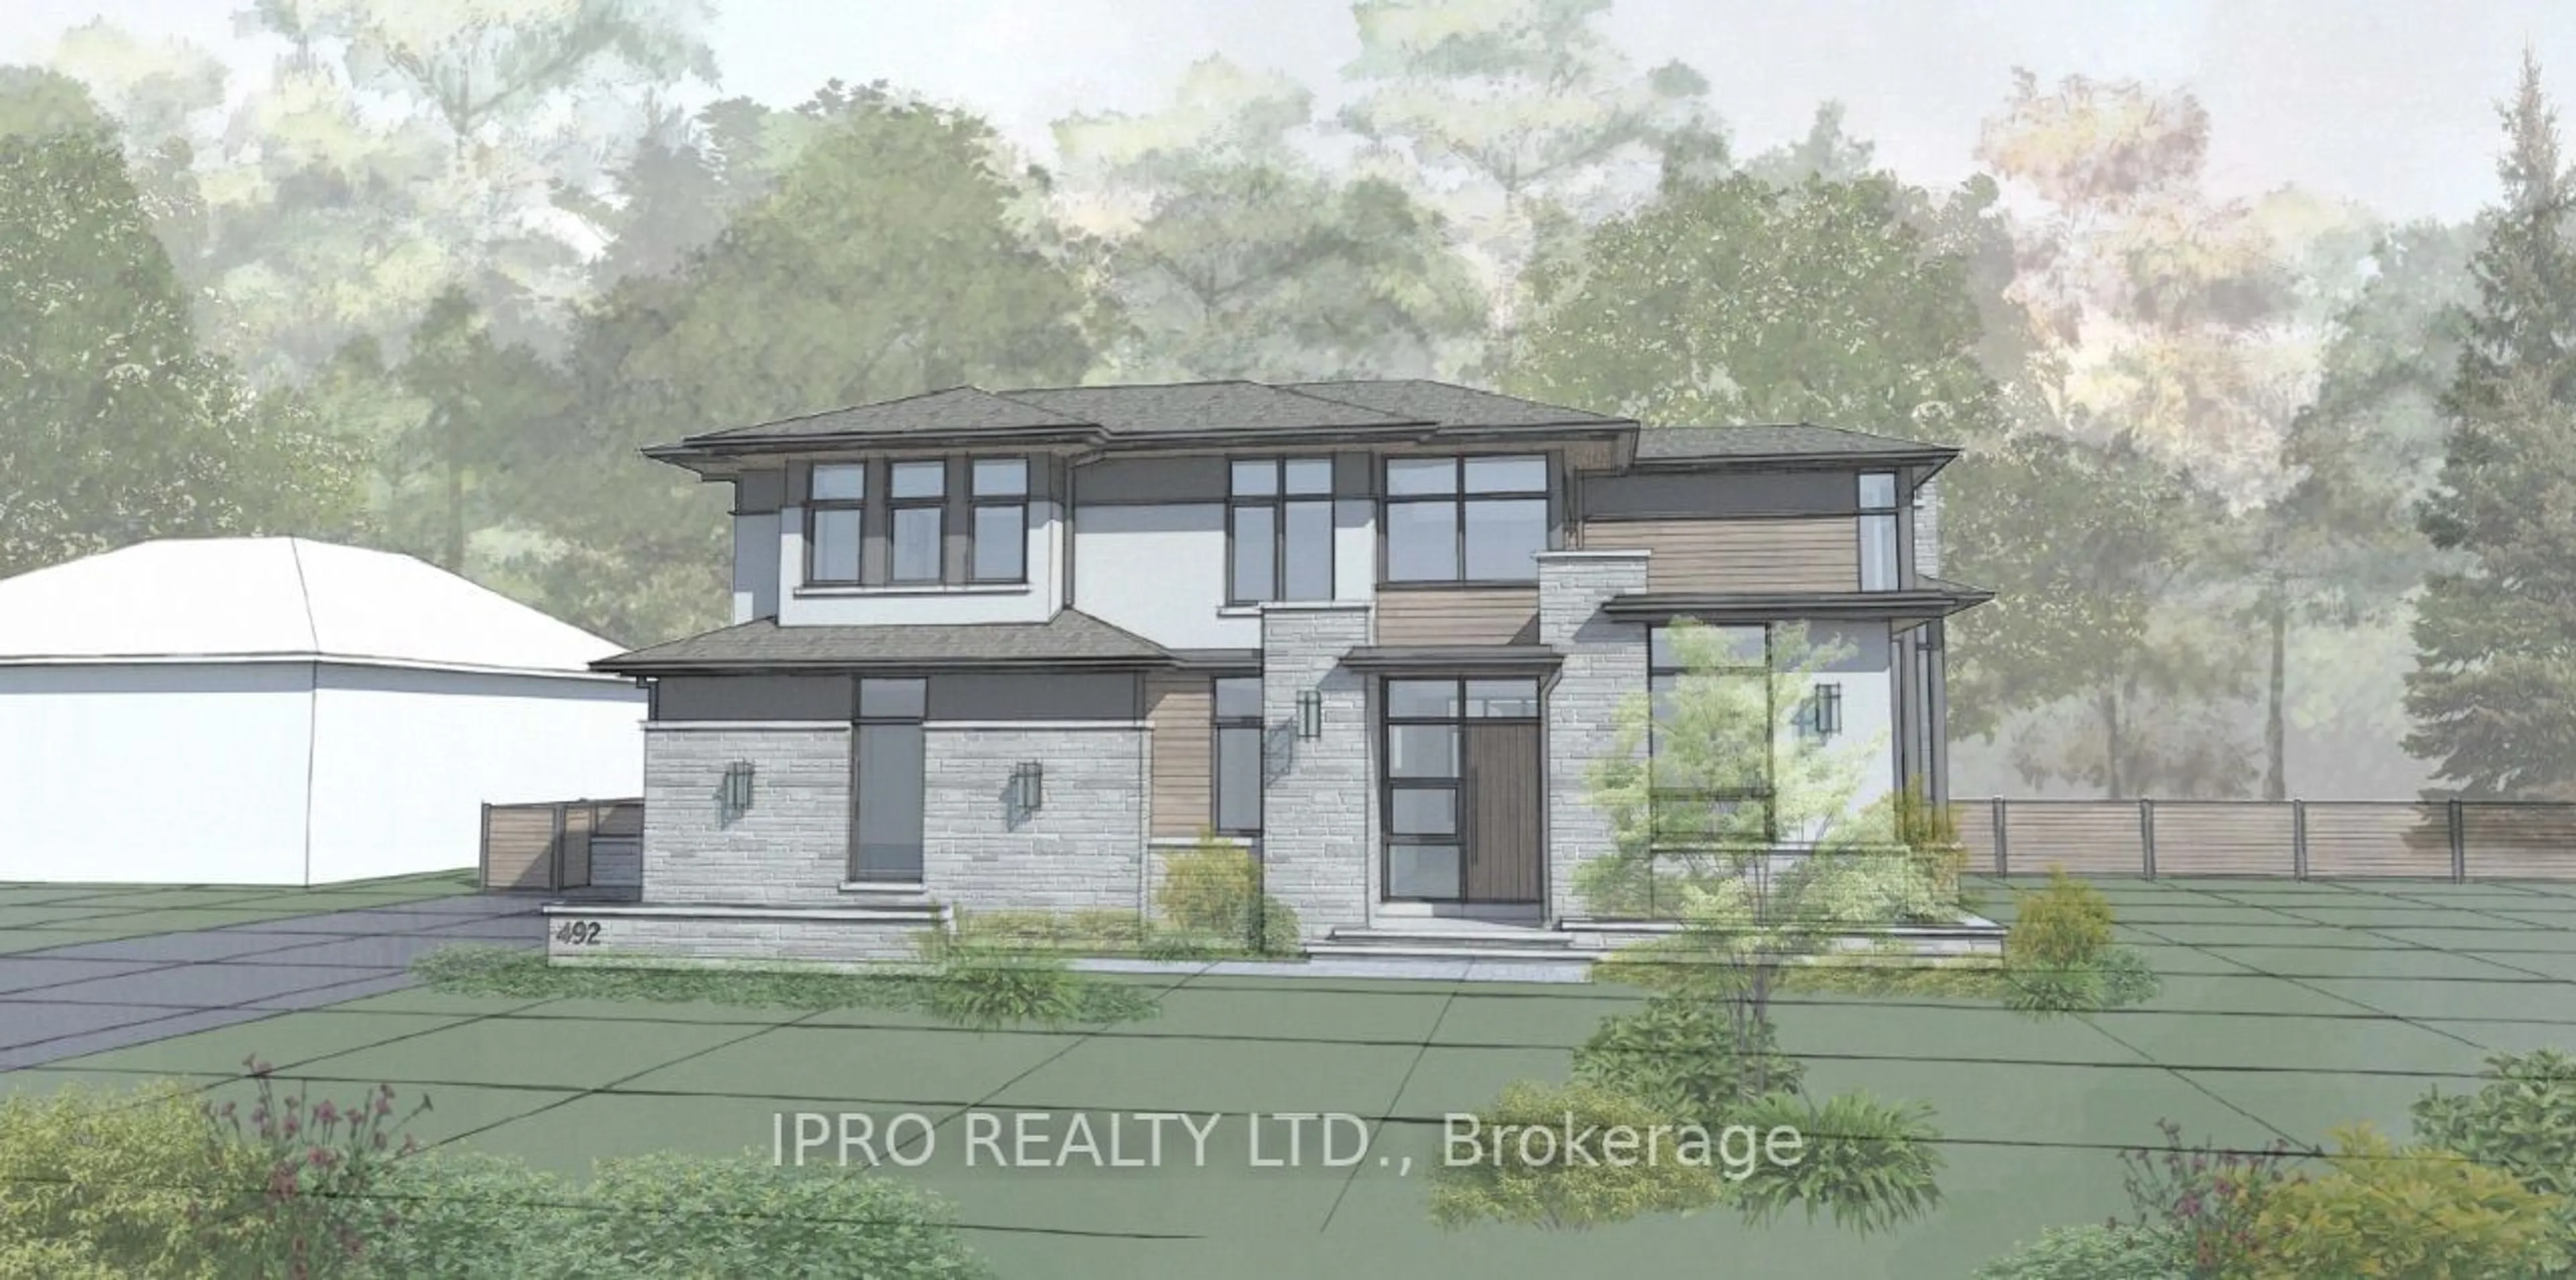 Home with stone exterior material for 492 Maple Grove Dr, Oakville Ontario L6J 4W2